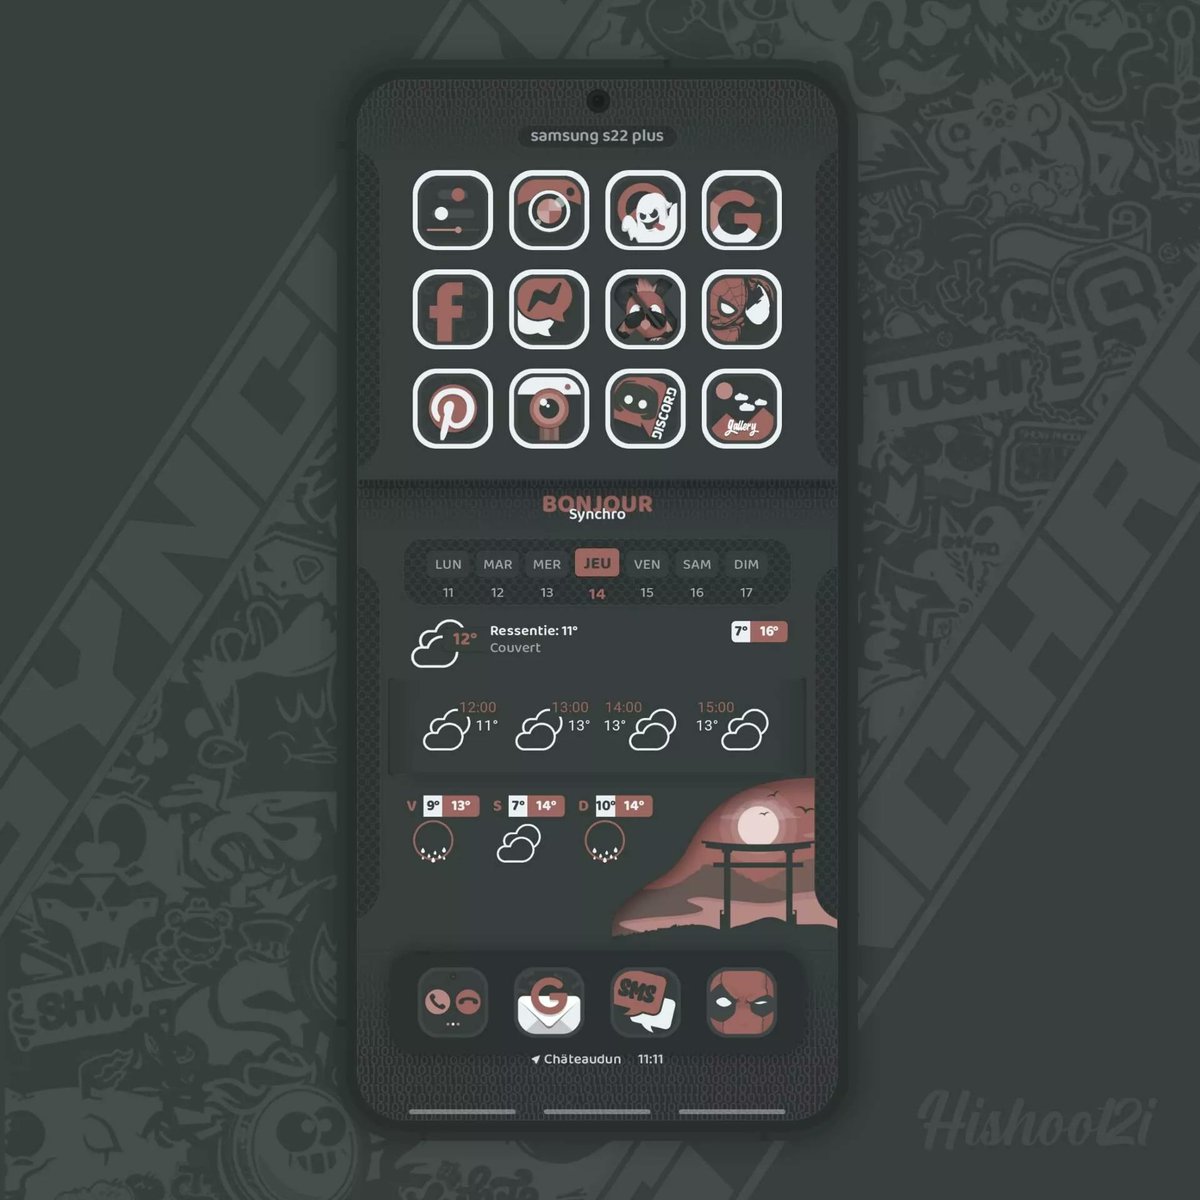 🏆Screen of the day🏆 by @SynchronizerD Very nice setup. Congratulation! Check our website myscreenie.com for more info. Follow us for more. #ioshomescreen #androidcustomization #homescreensetup